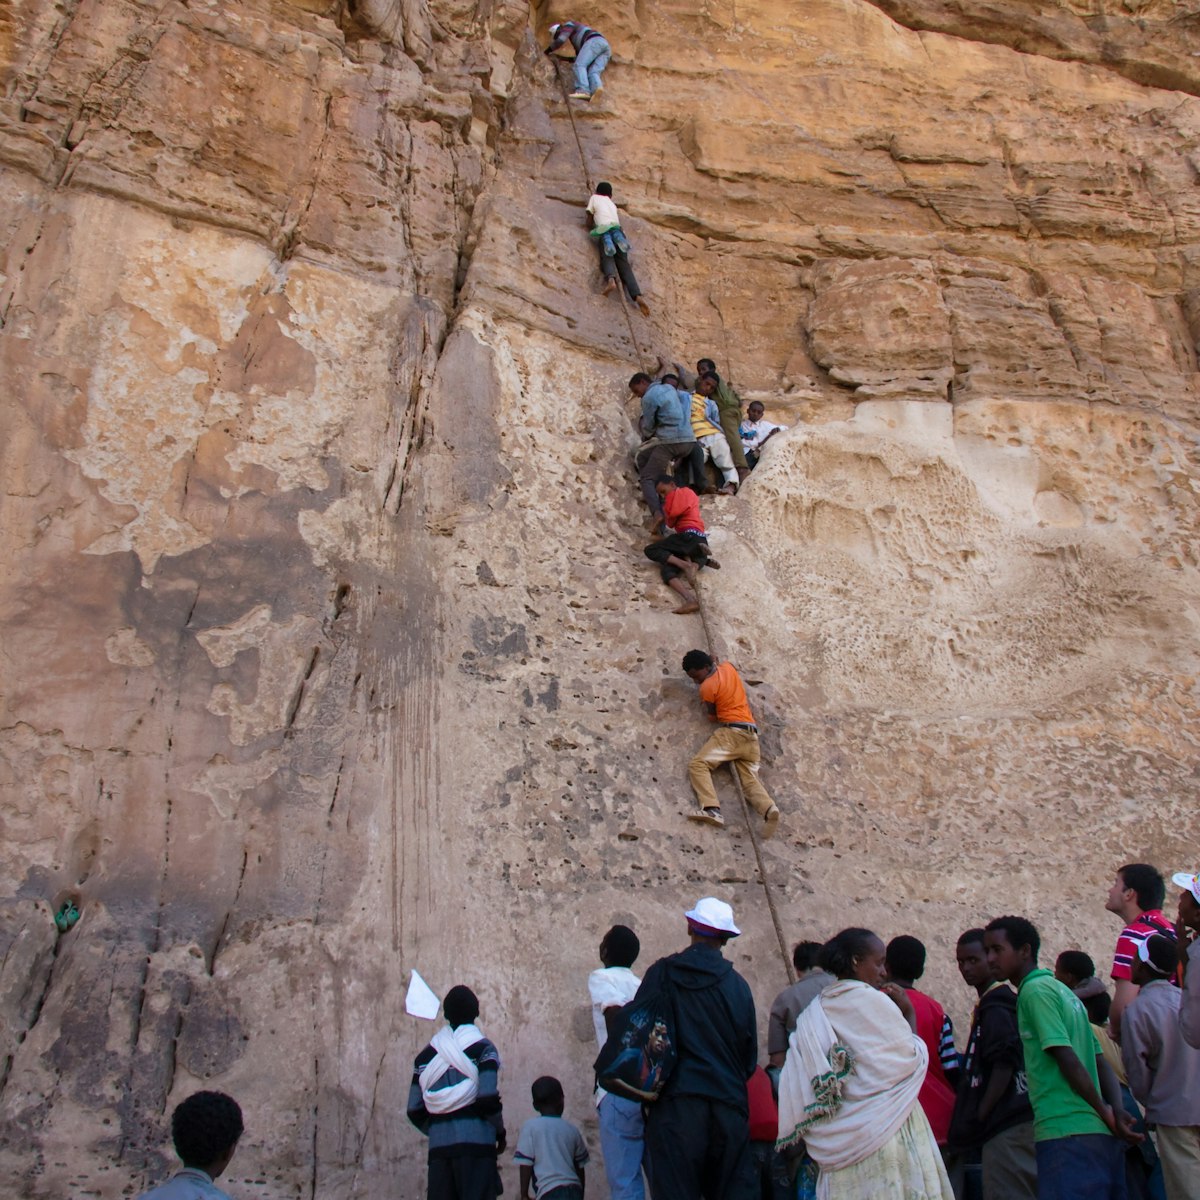 Orthodox Christian pilgrim men being hauled up a 15m cliff face by monks to reach the mountain-top church and monastery of Debre Damo, Northern Tigray province, Ethiopia.